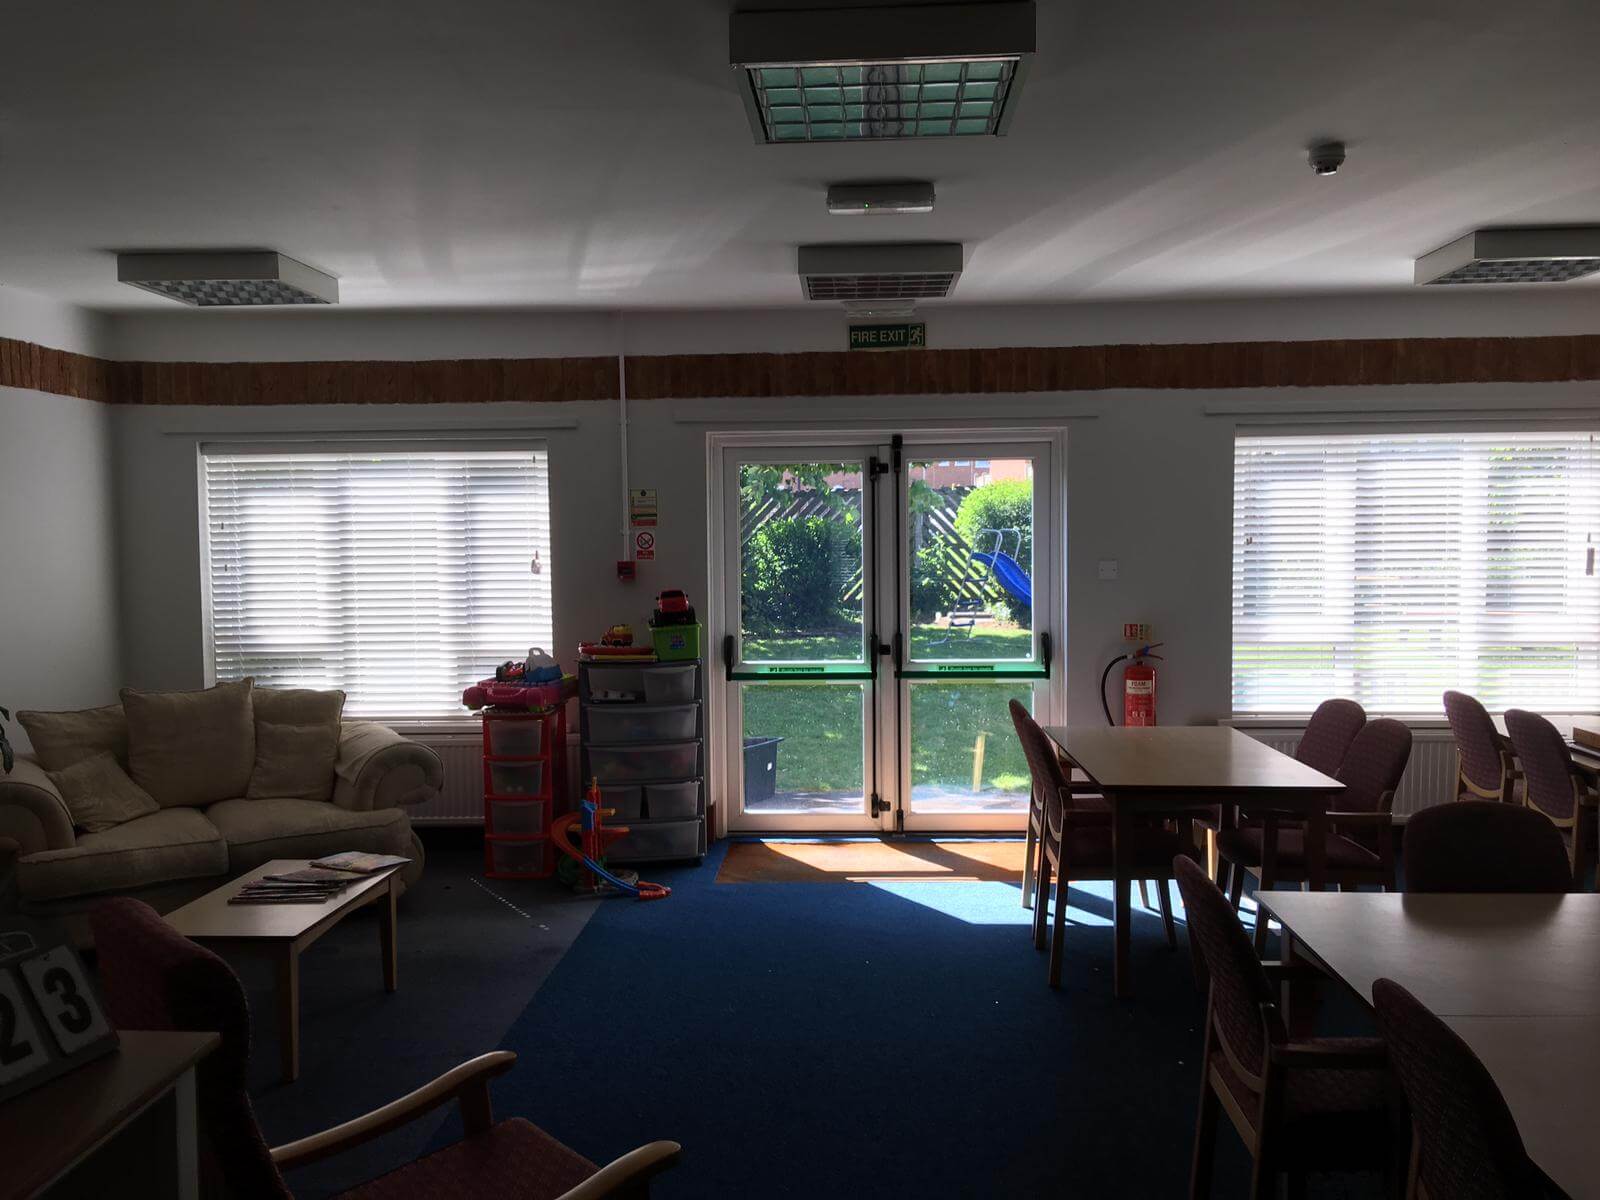 Suppliers of Commercial Blinds For Care Homes